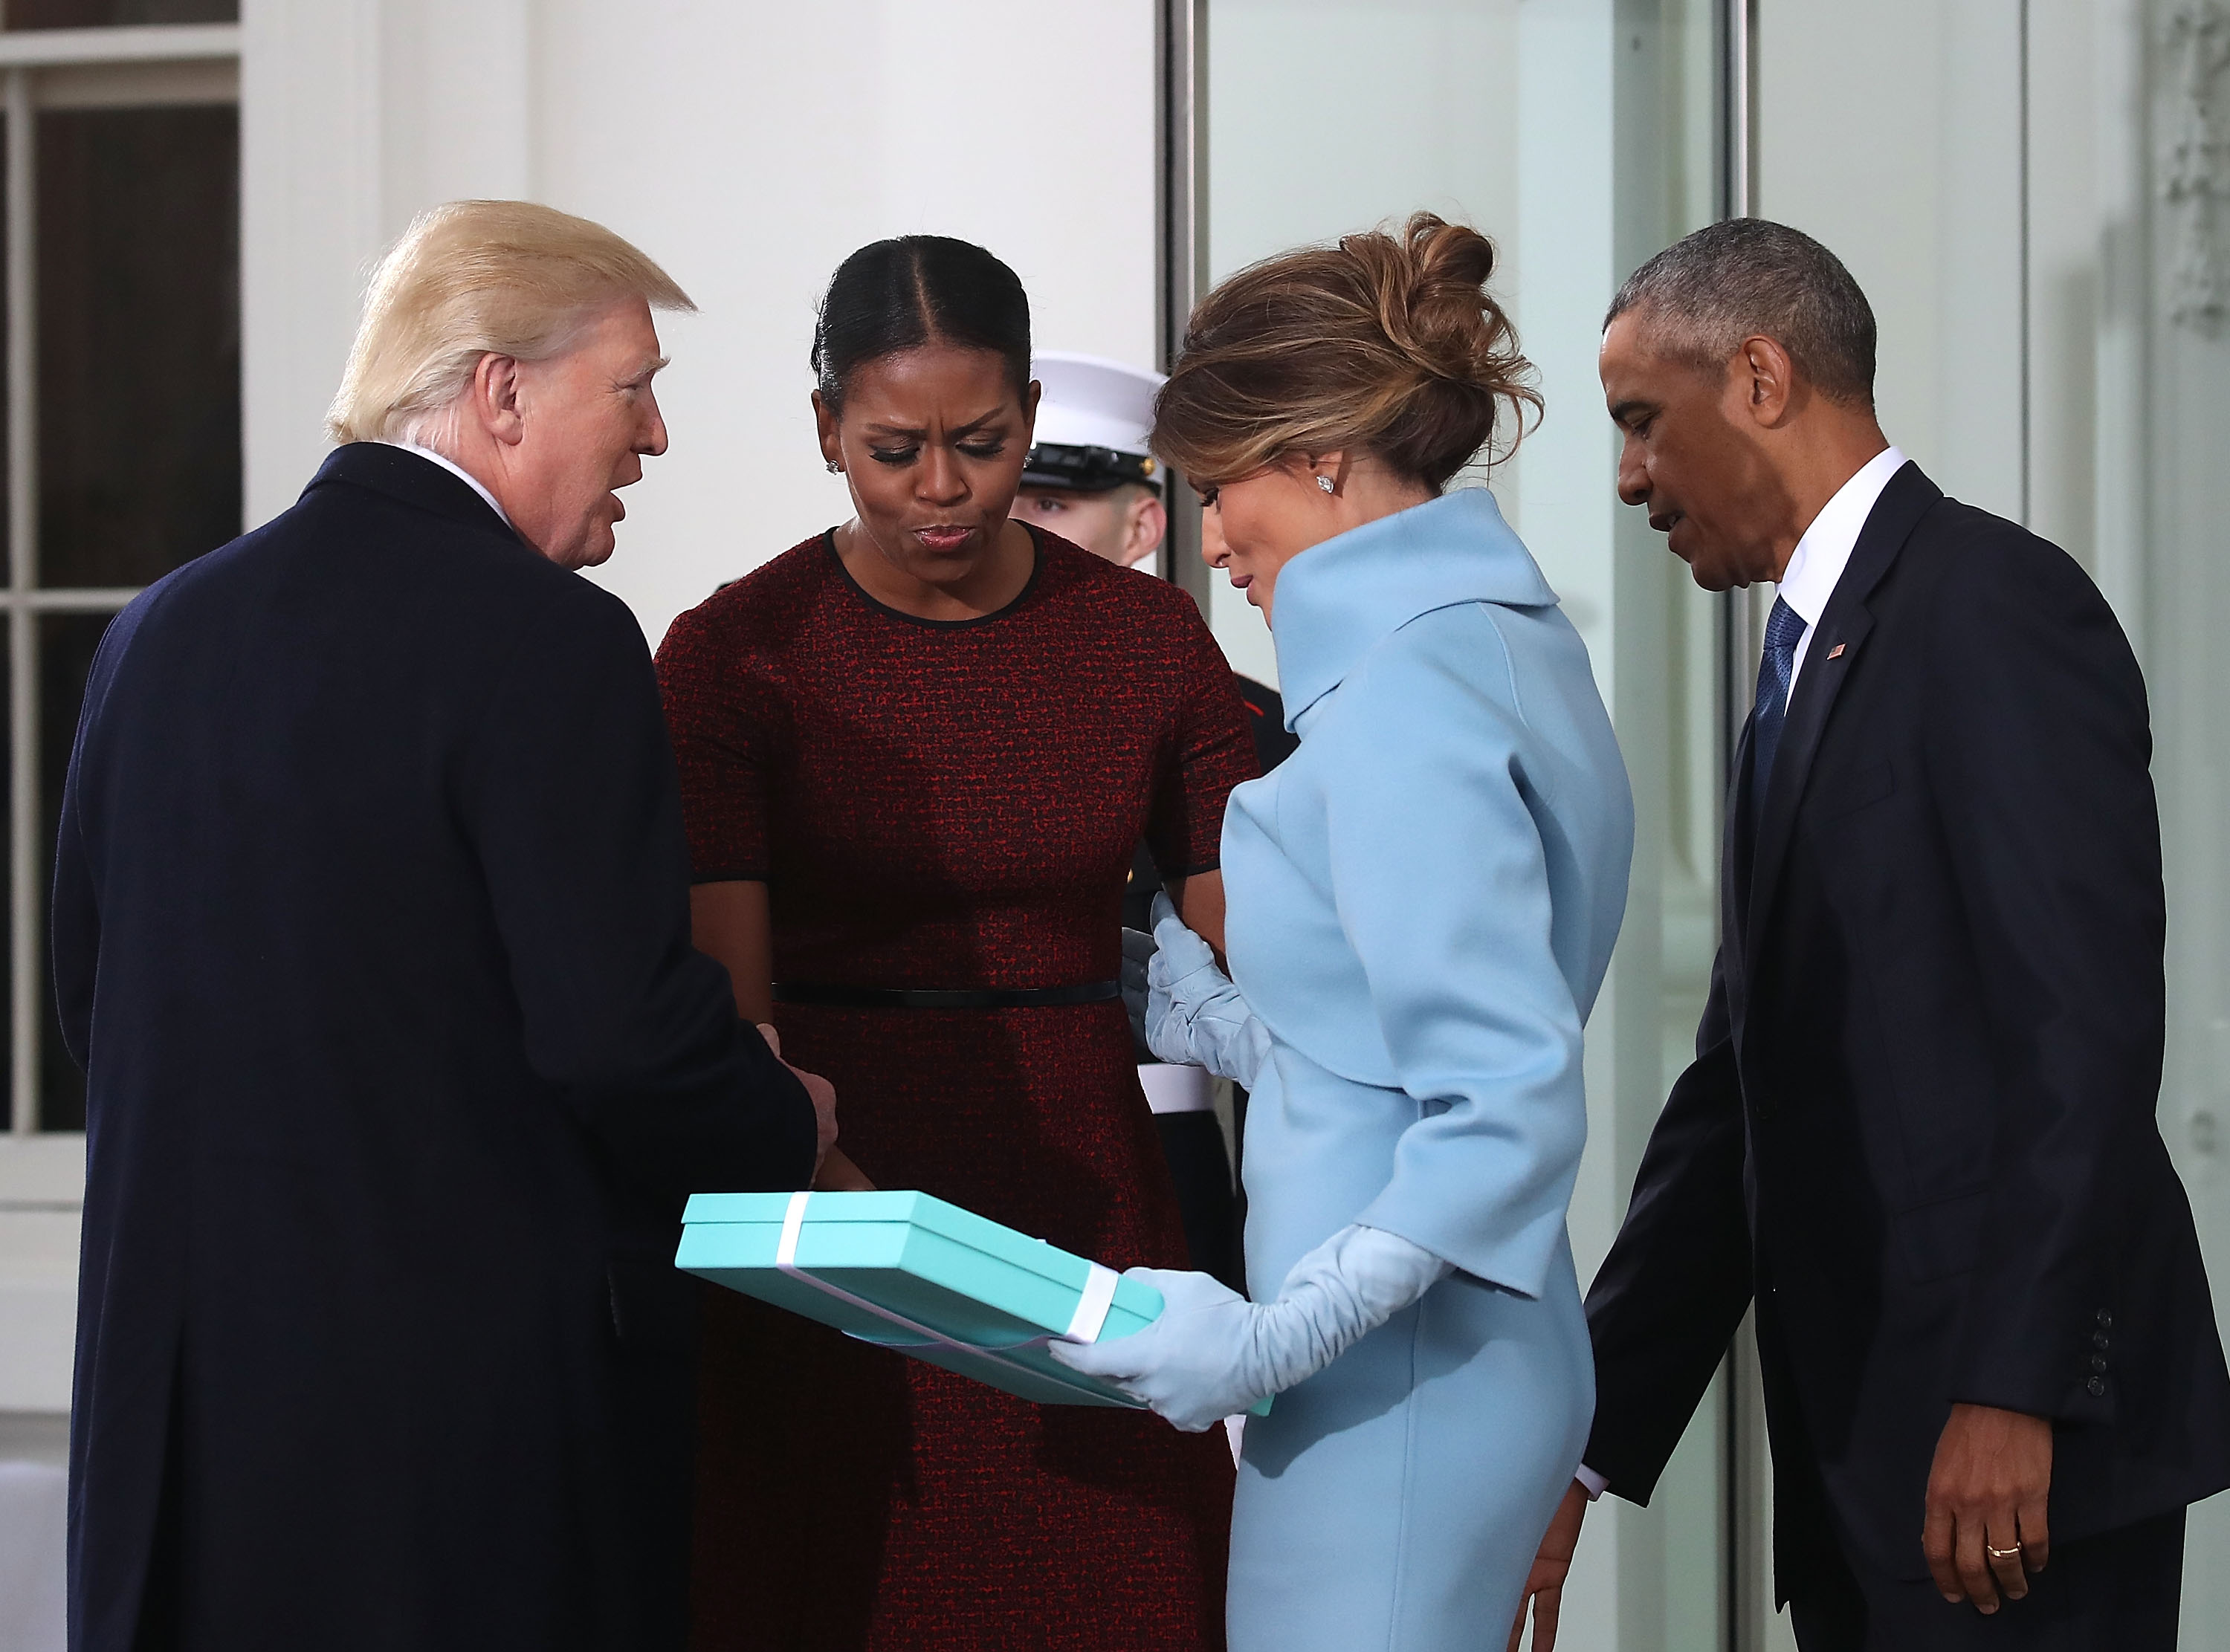 WASHINGTON, DC - JANUARY 20: President-elect Donald Trump (L),and his wife Melania Trump (2ndR), are greeted by President Barack Obama and his wife first lady Michelle Obama, upon arriving at the White House on January 20, 2017 in Washington, DC. Later in the morning President-elect Trump will be sworn in as the nation's 45th president during an inaugural ceremony at the U.S. Capitol. (Photo by Mark Wilson/Getty Images)